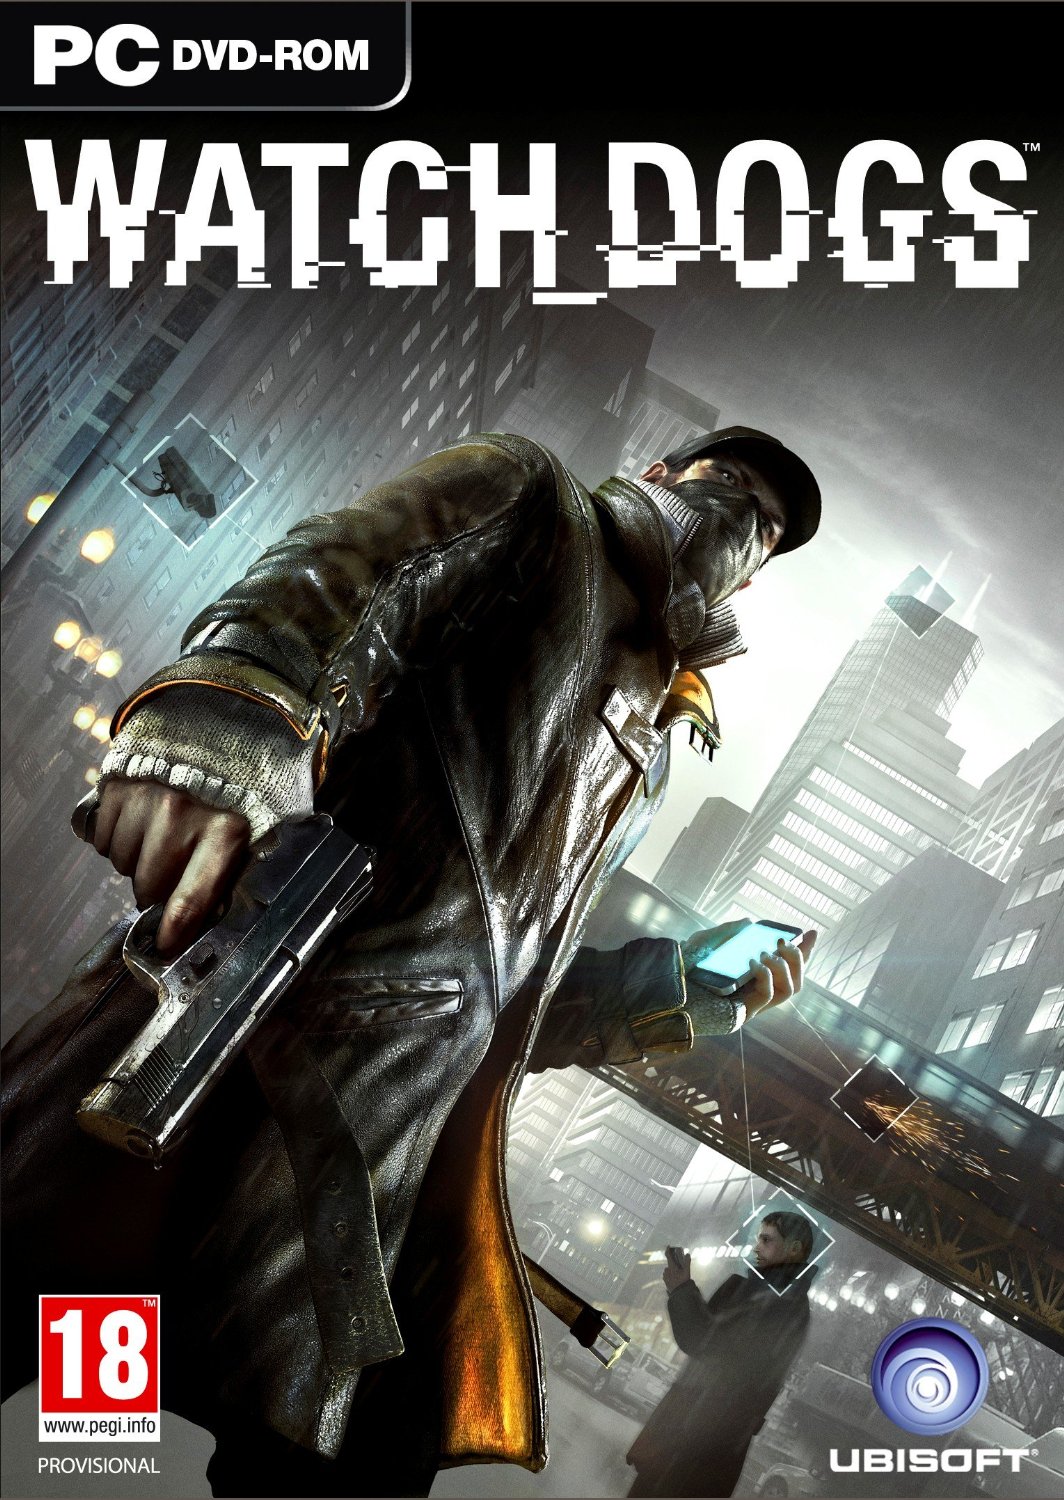 Watch Dogs CD Key for Uplay: Day 1 Special Edition (Multi-Language)